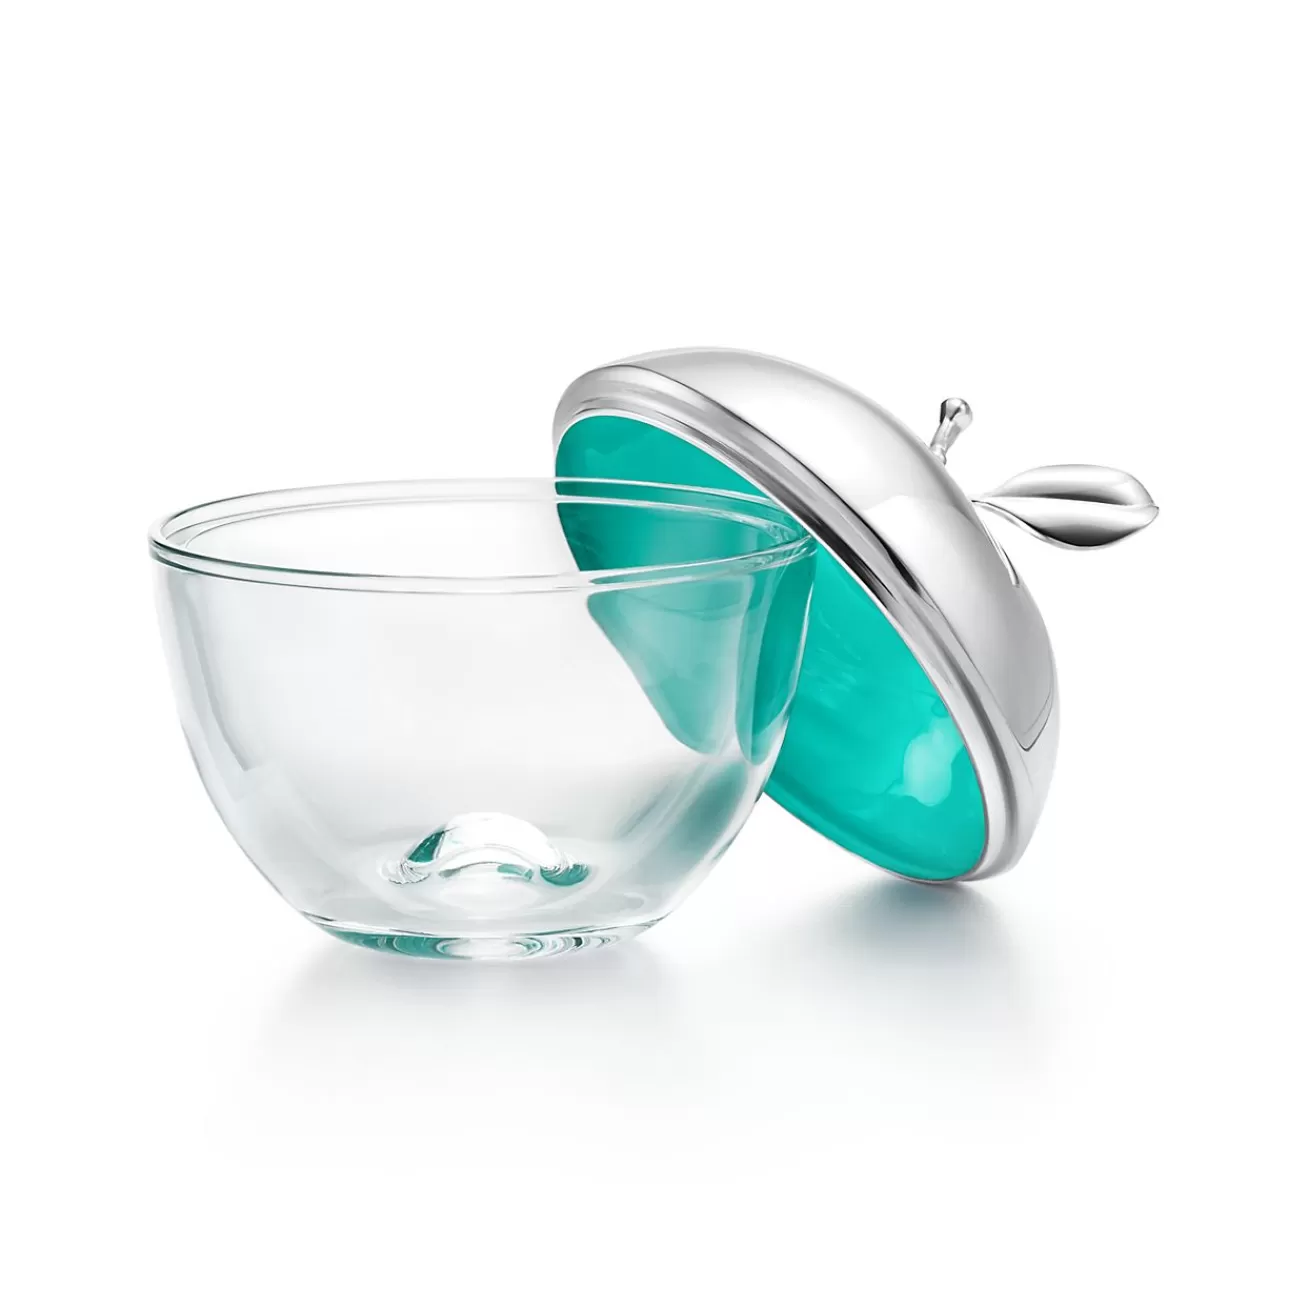 Tiffany & Co. Shop Crystal and Sterling Silver Apple Box | ^ Gifts to Personalize | Business Gifts